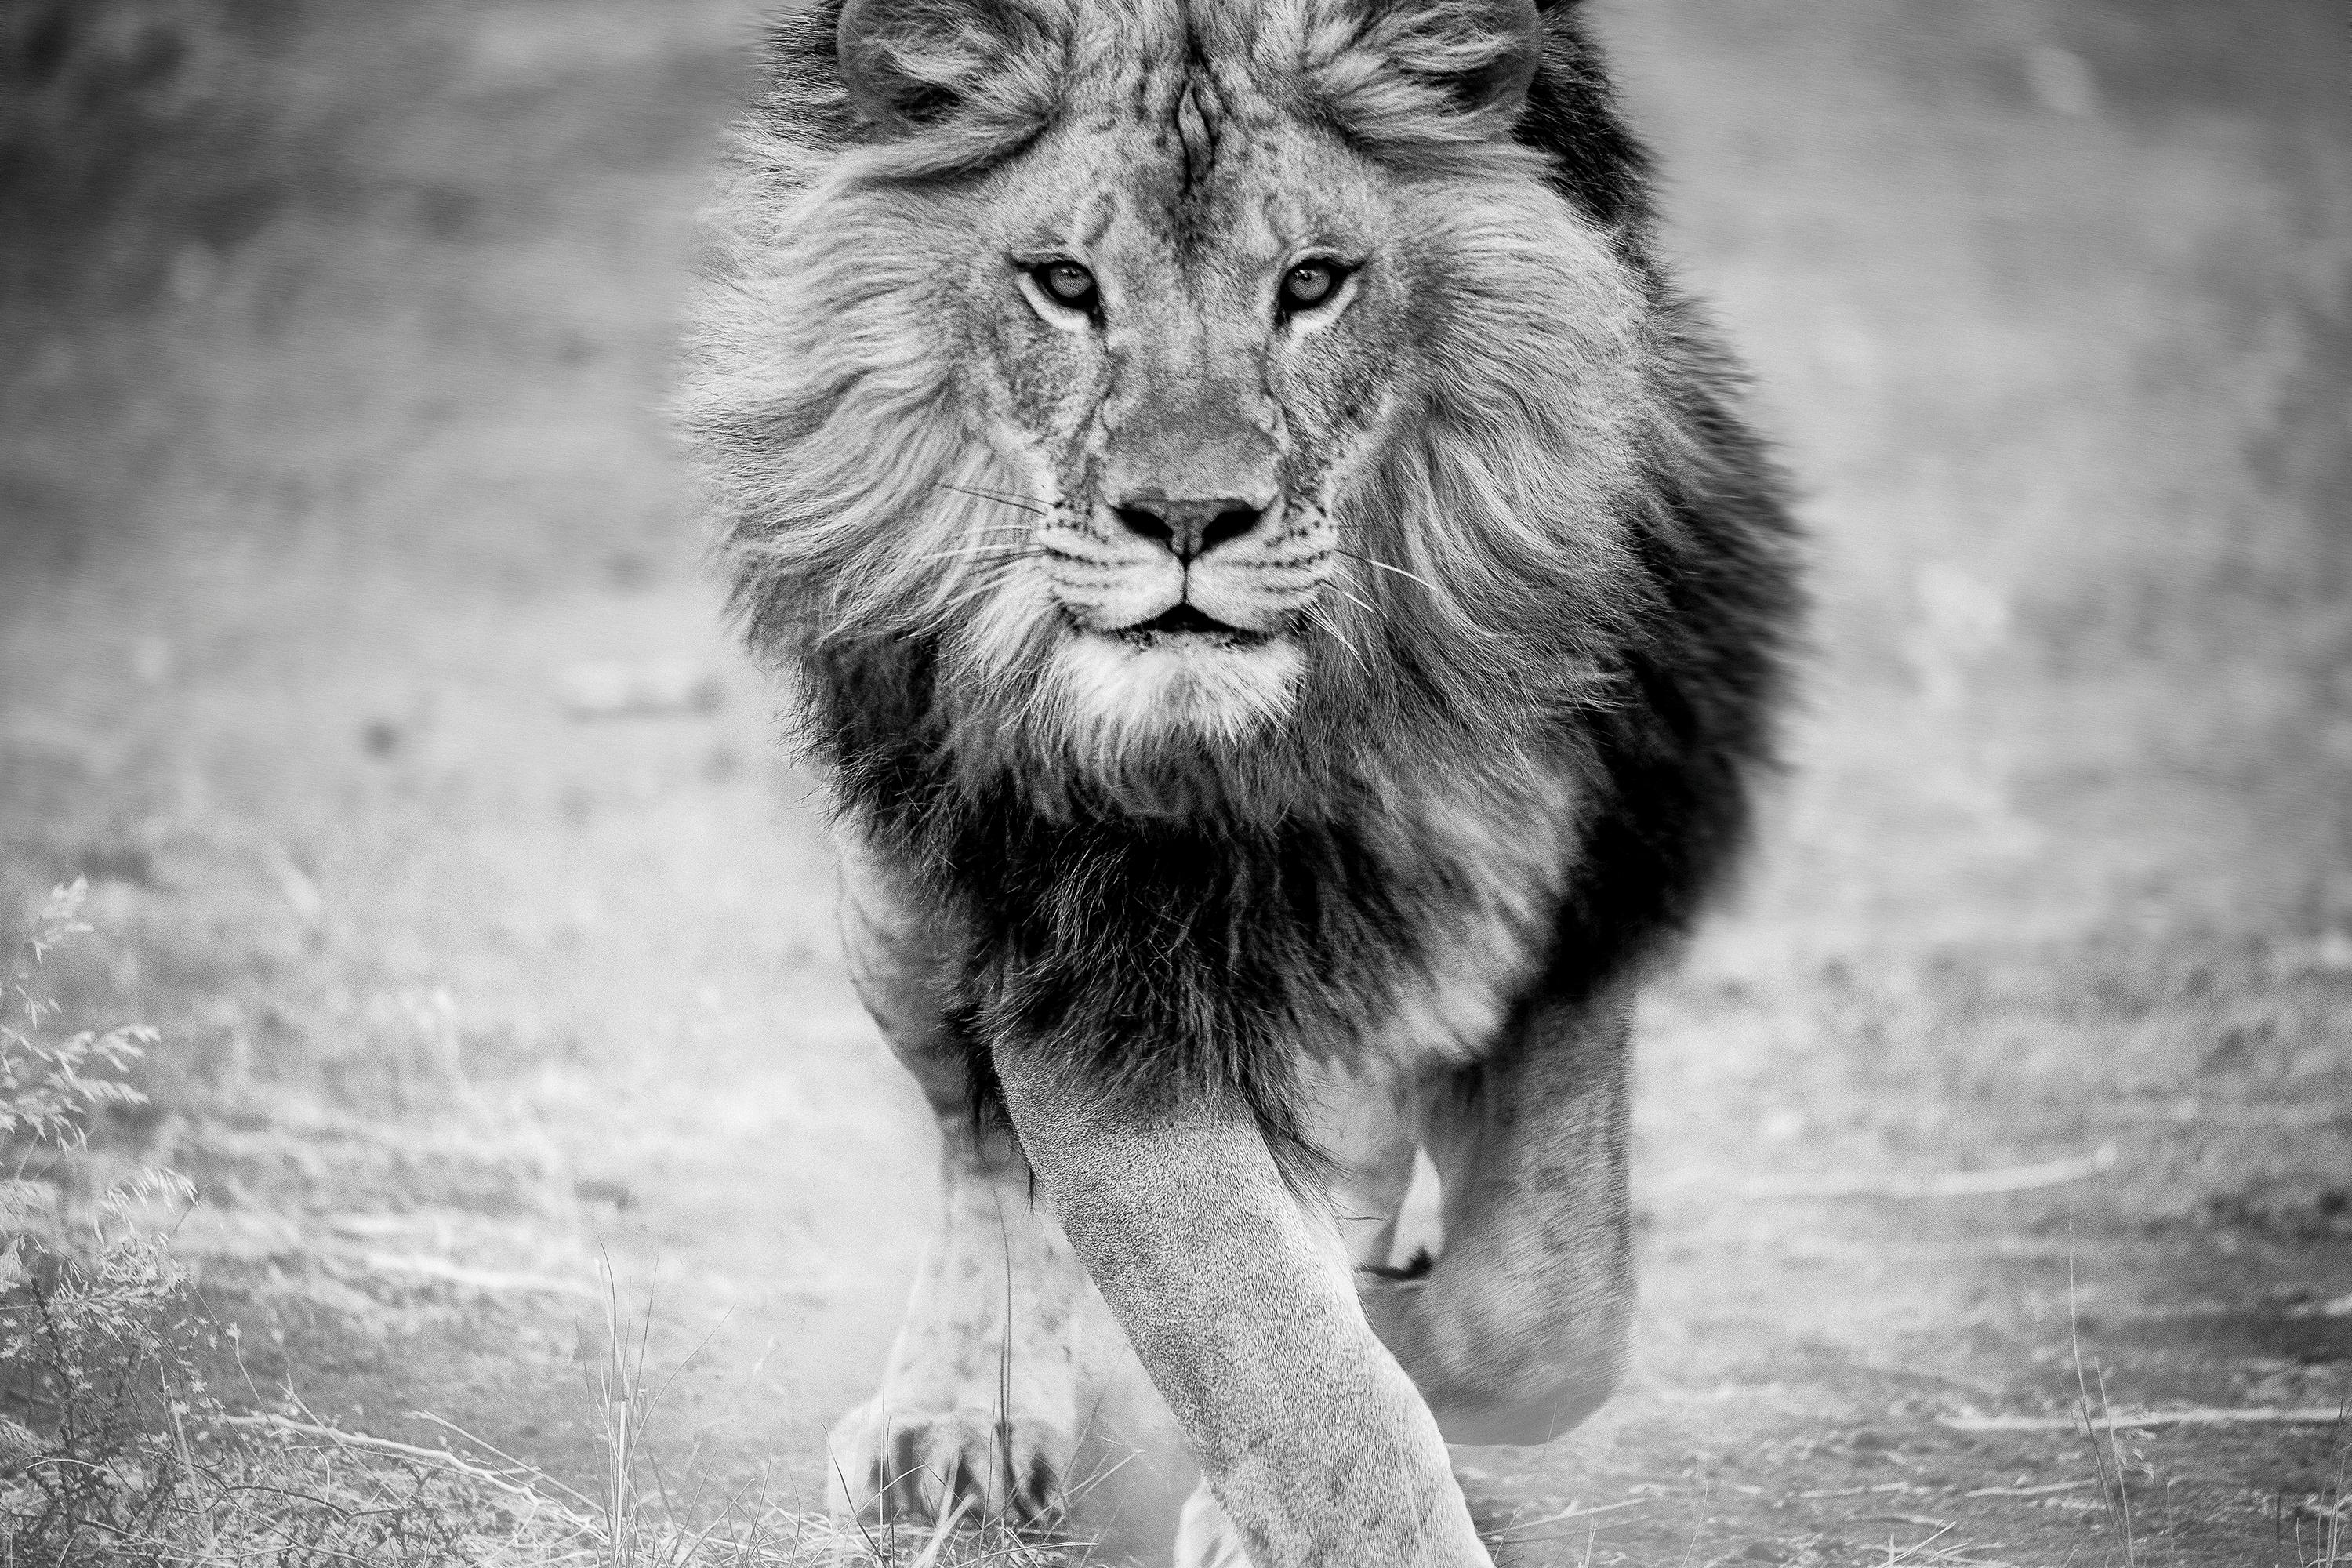 Shane Russeck Landscape Photograph - Panthera Leo - 36x48 Contemporary Black and White Photography, Lion 